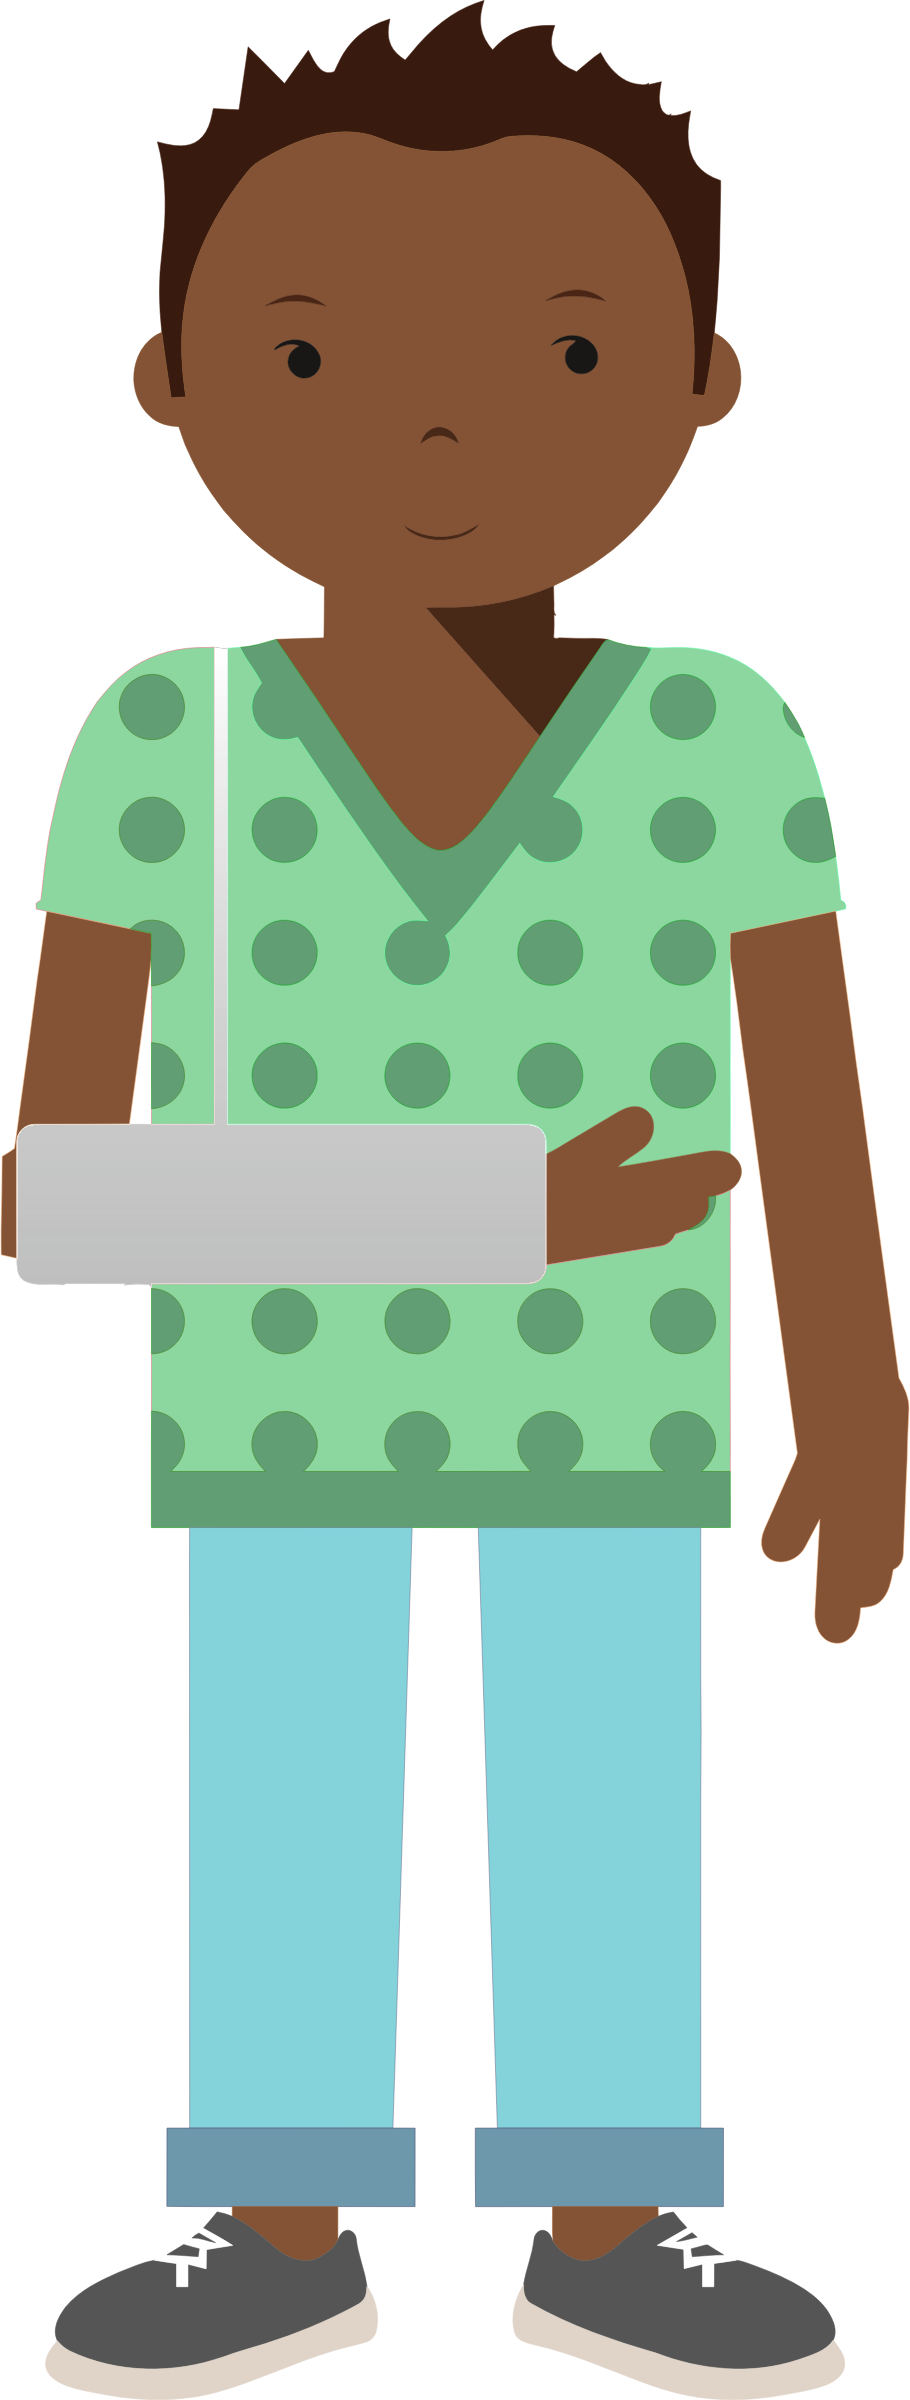 A Cartoon Of A Person With A Cast On Their Arm